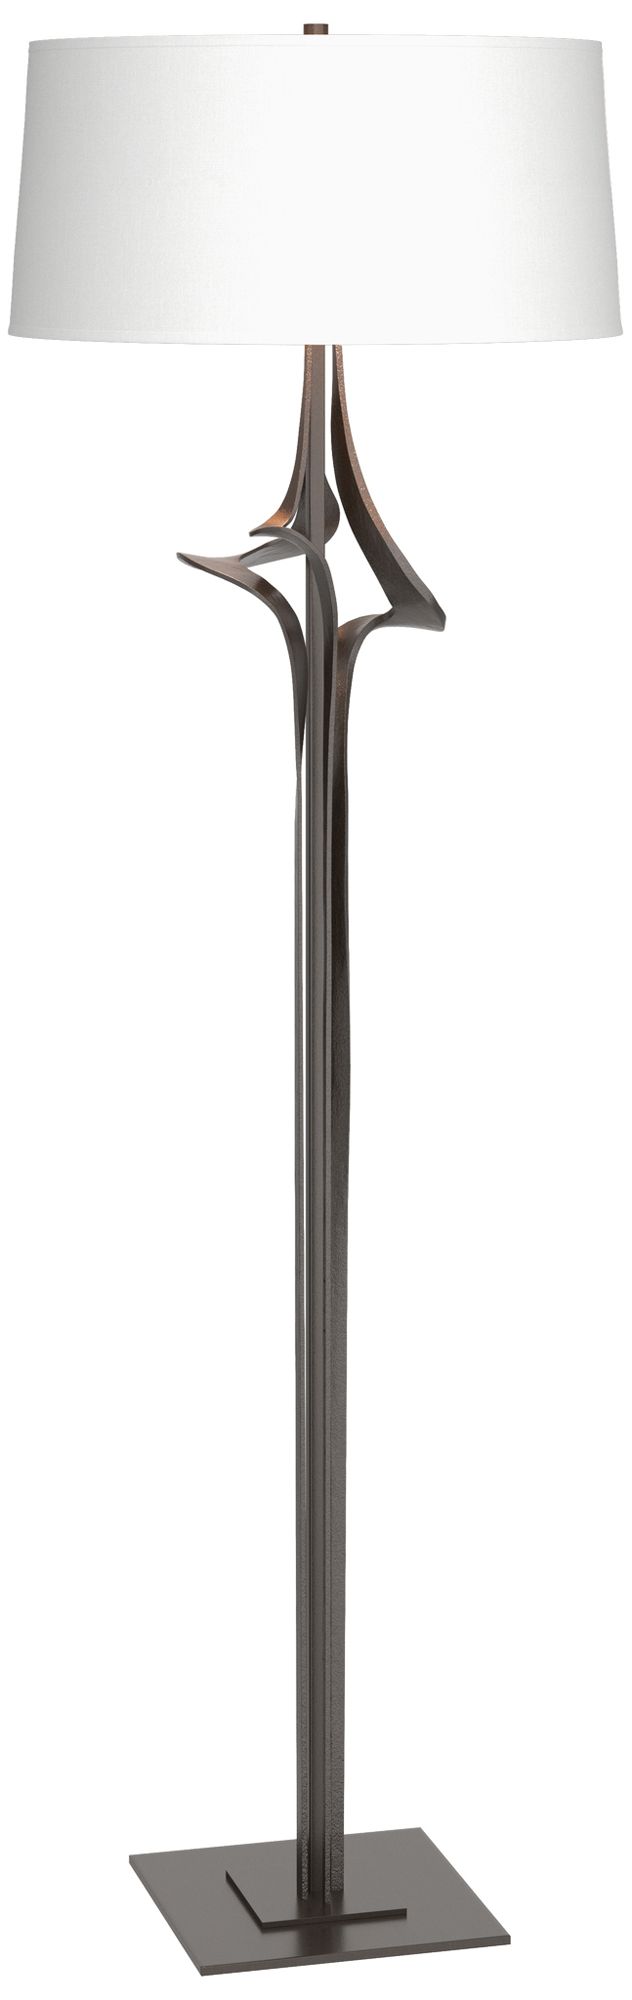 Antasia 58.6"H Oil Rubbed Bronze Floor Lamp With Natural Anna Shade